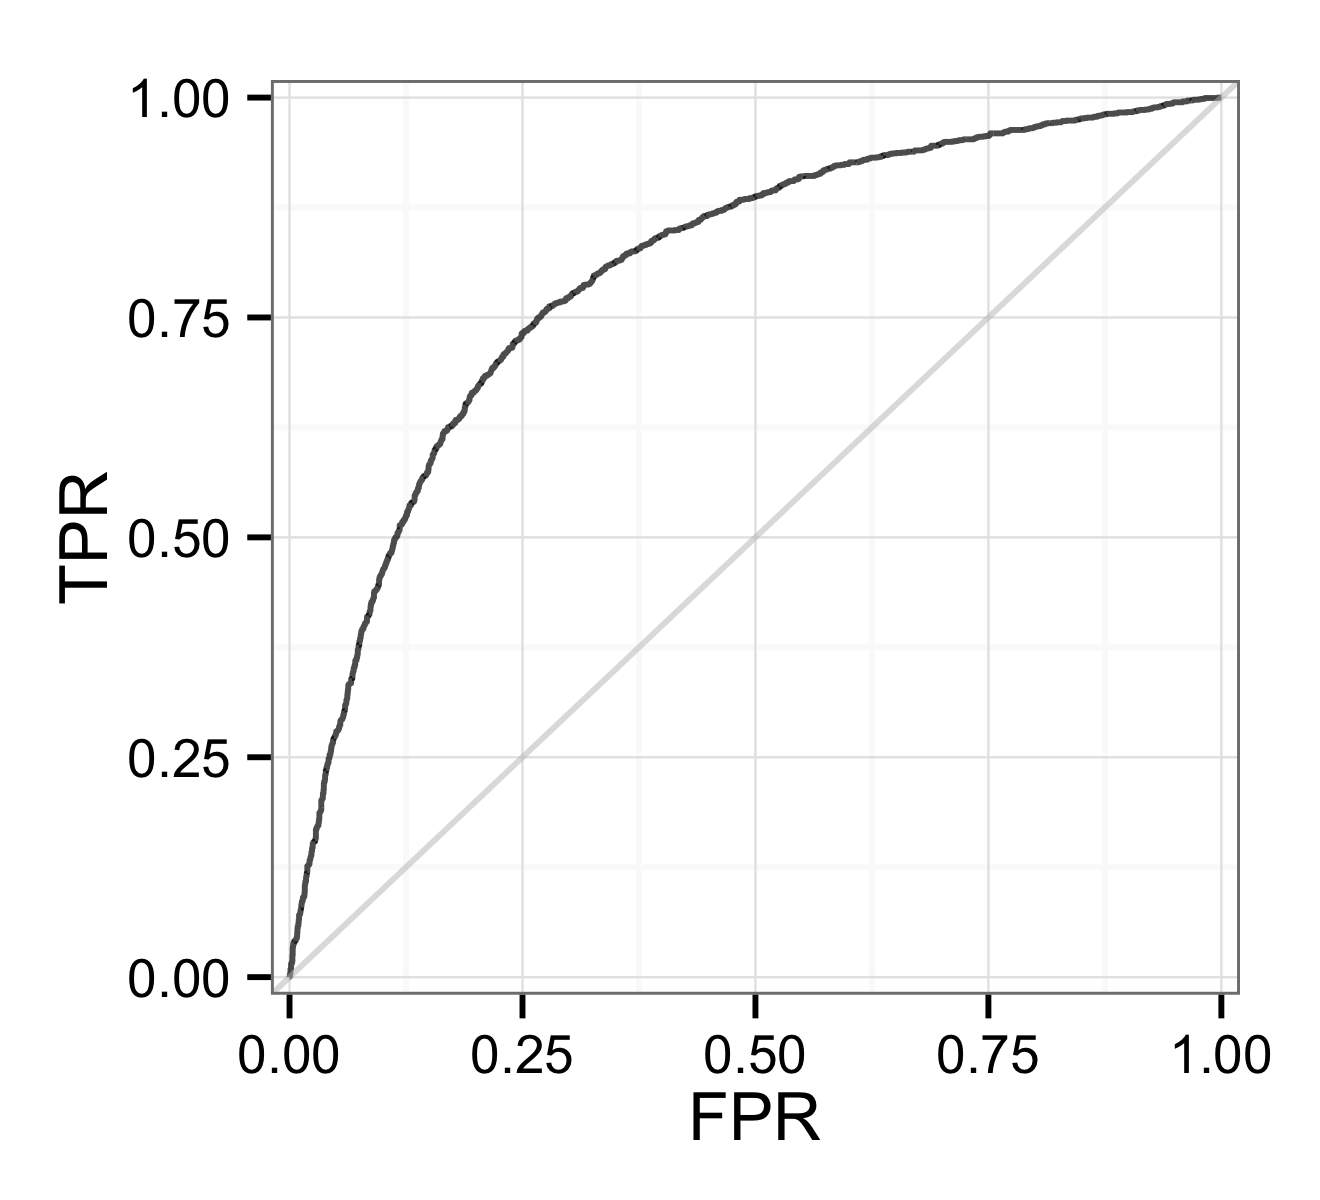 ROC curve for the example data